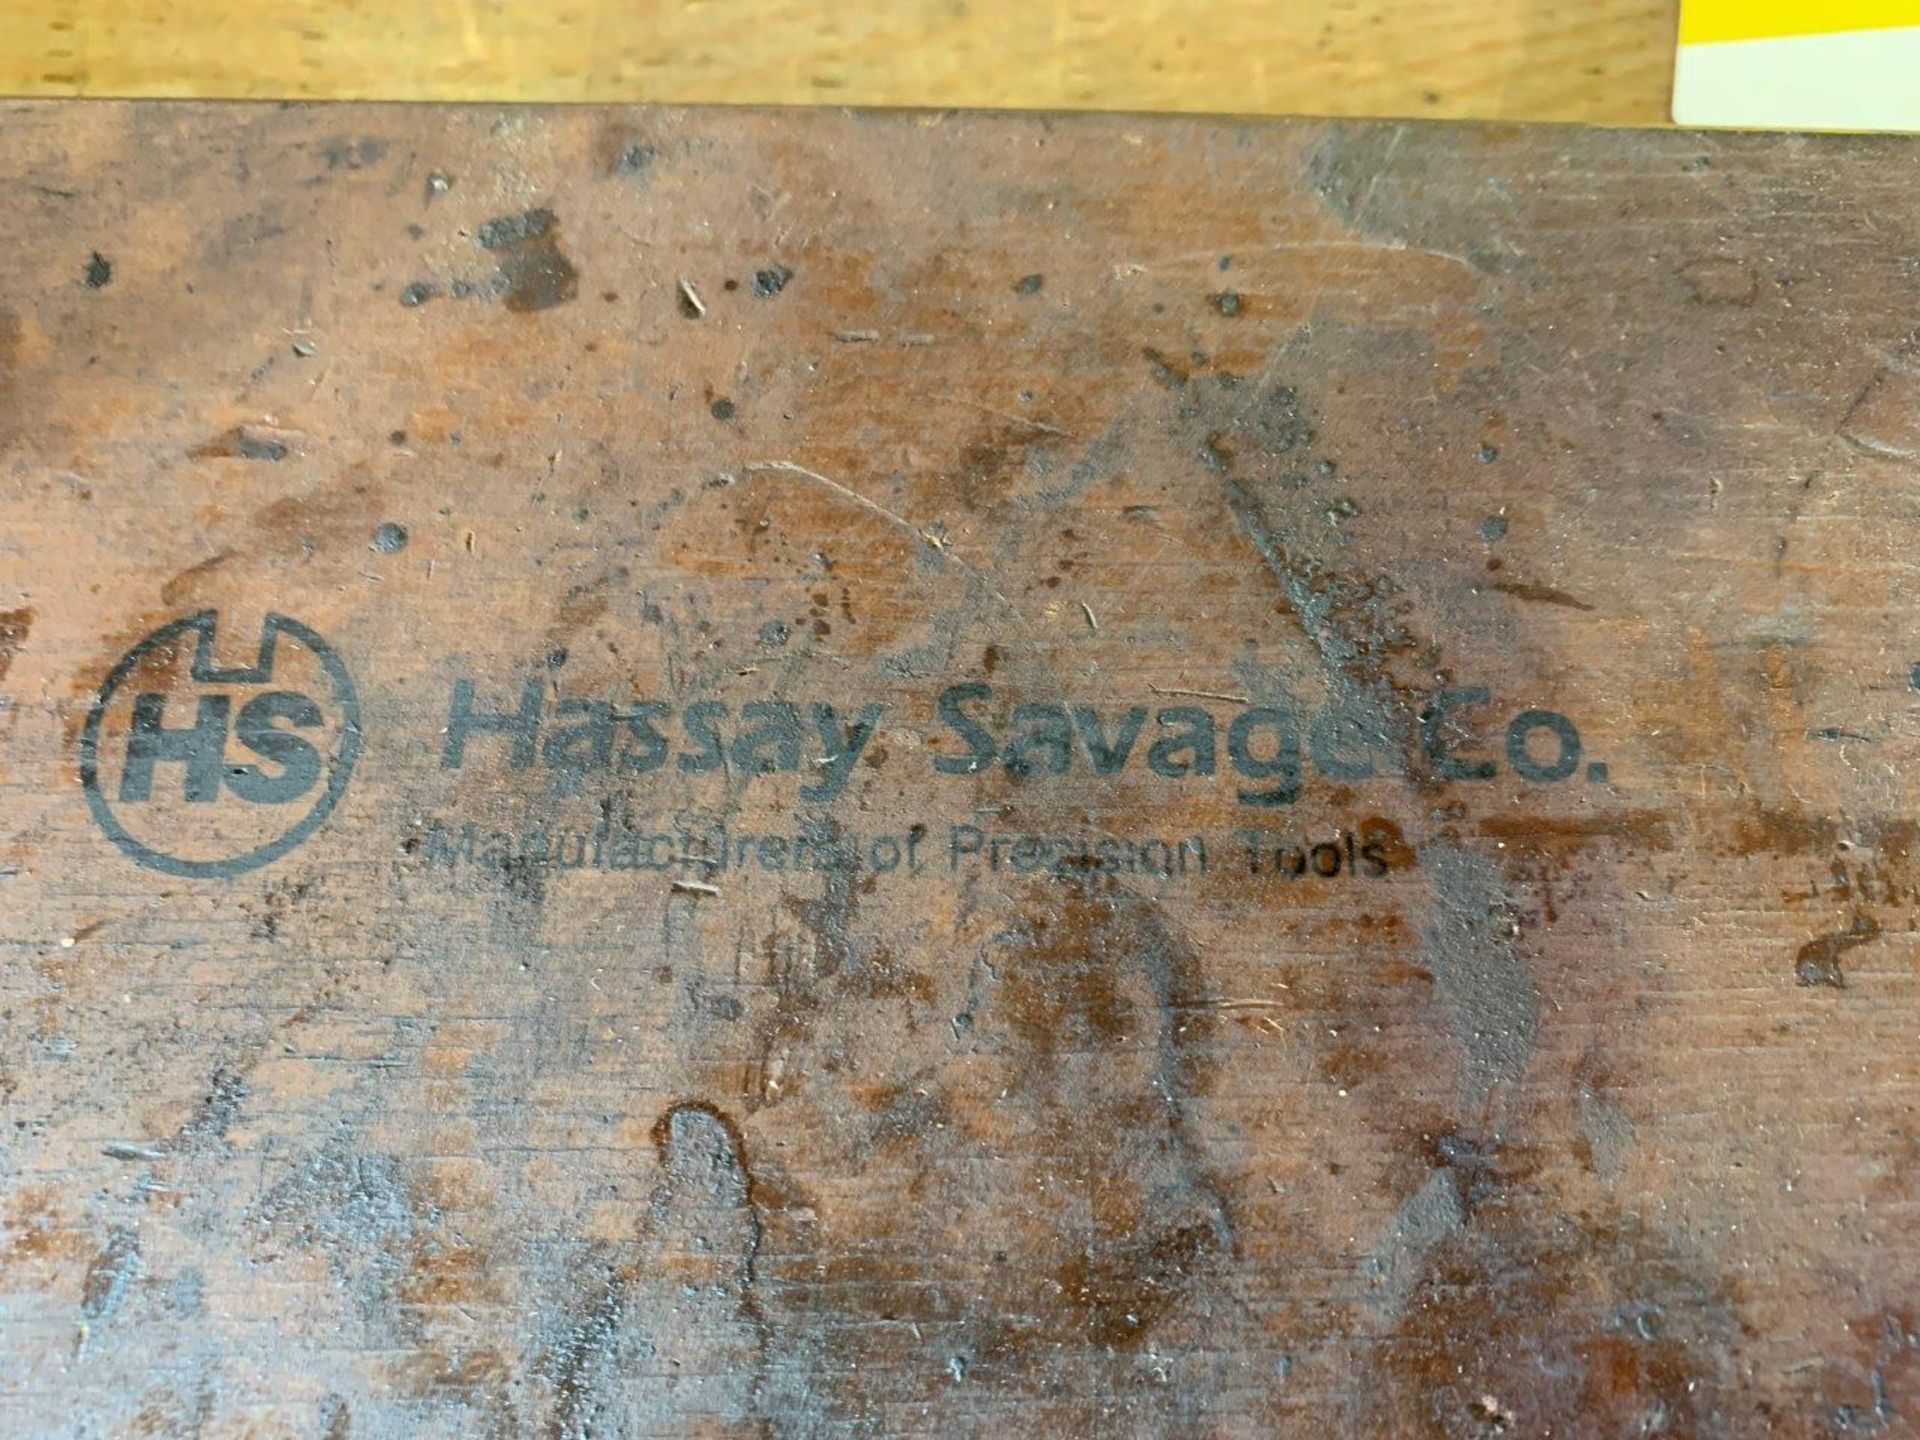 MACHINIST HASSAY SAVAGE BROACH SET W/ EXTRA GUIDES, 1/8 - 3/8 - Image 2 of 4